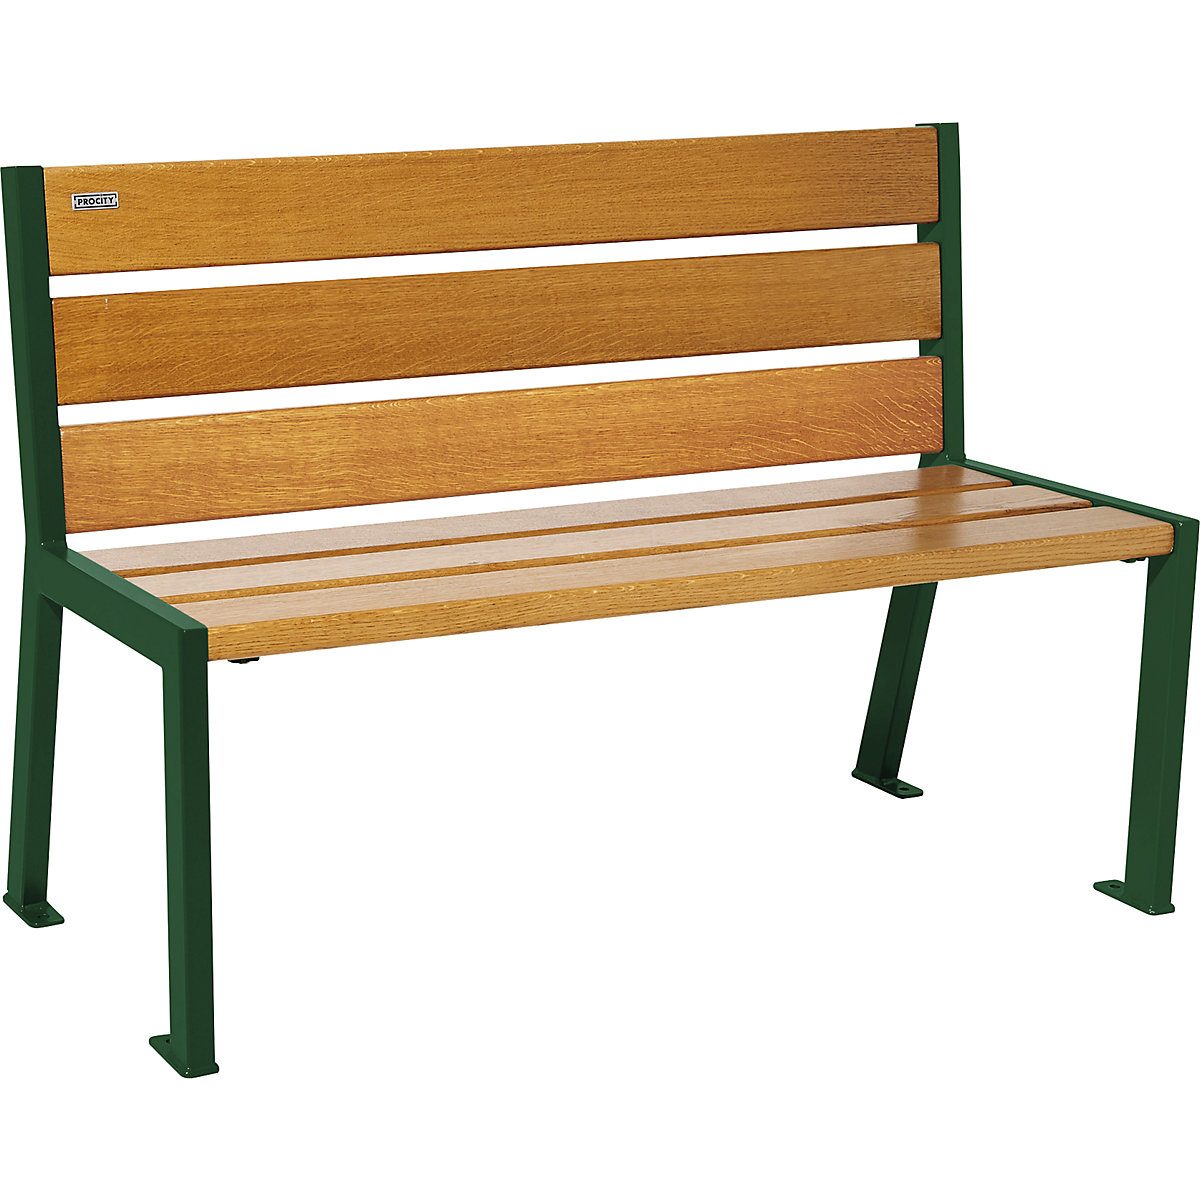 SILAOS® bench made of wood – PROCITY, with back rest, length 1200 mm, moss green RAL 6005, light oak finish-8